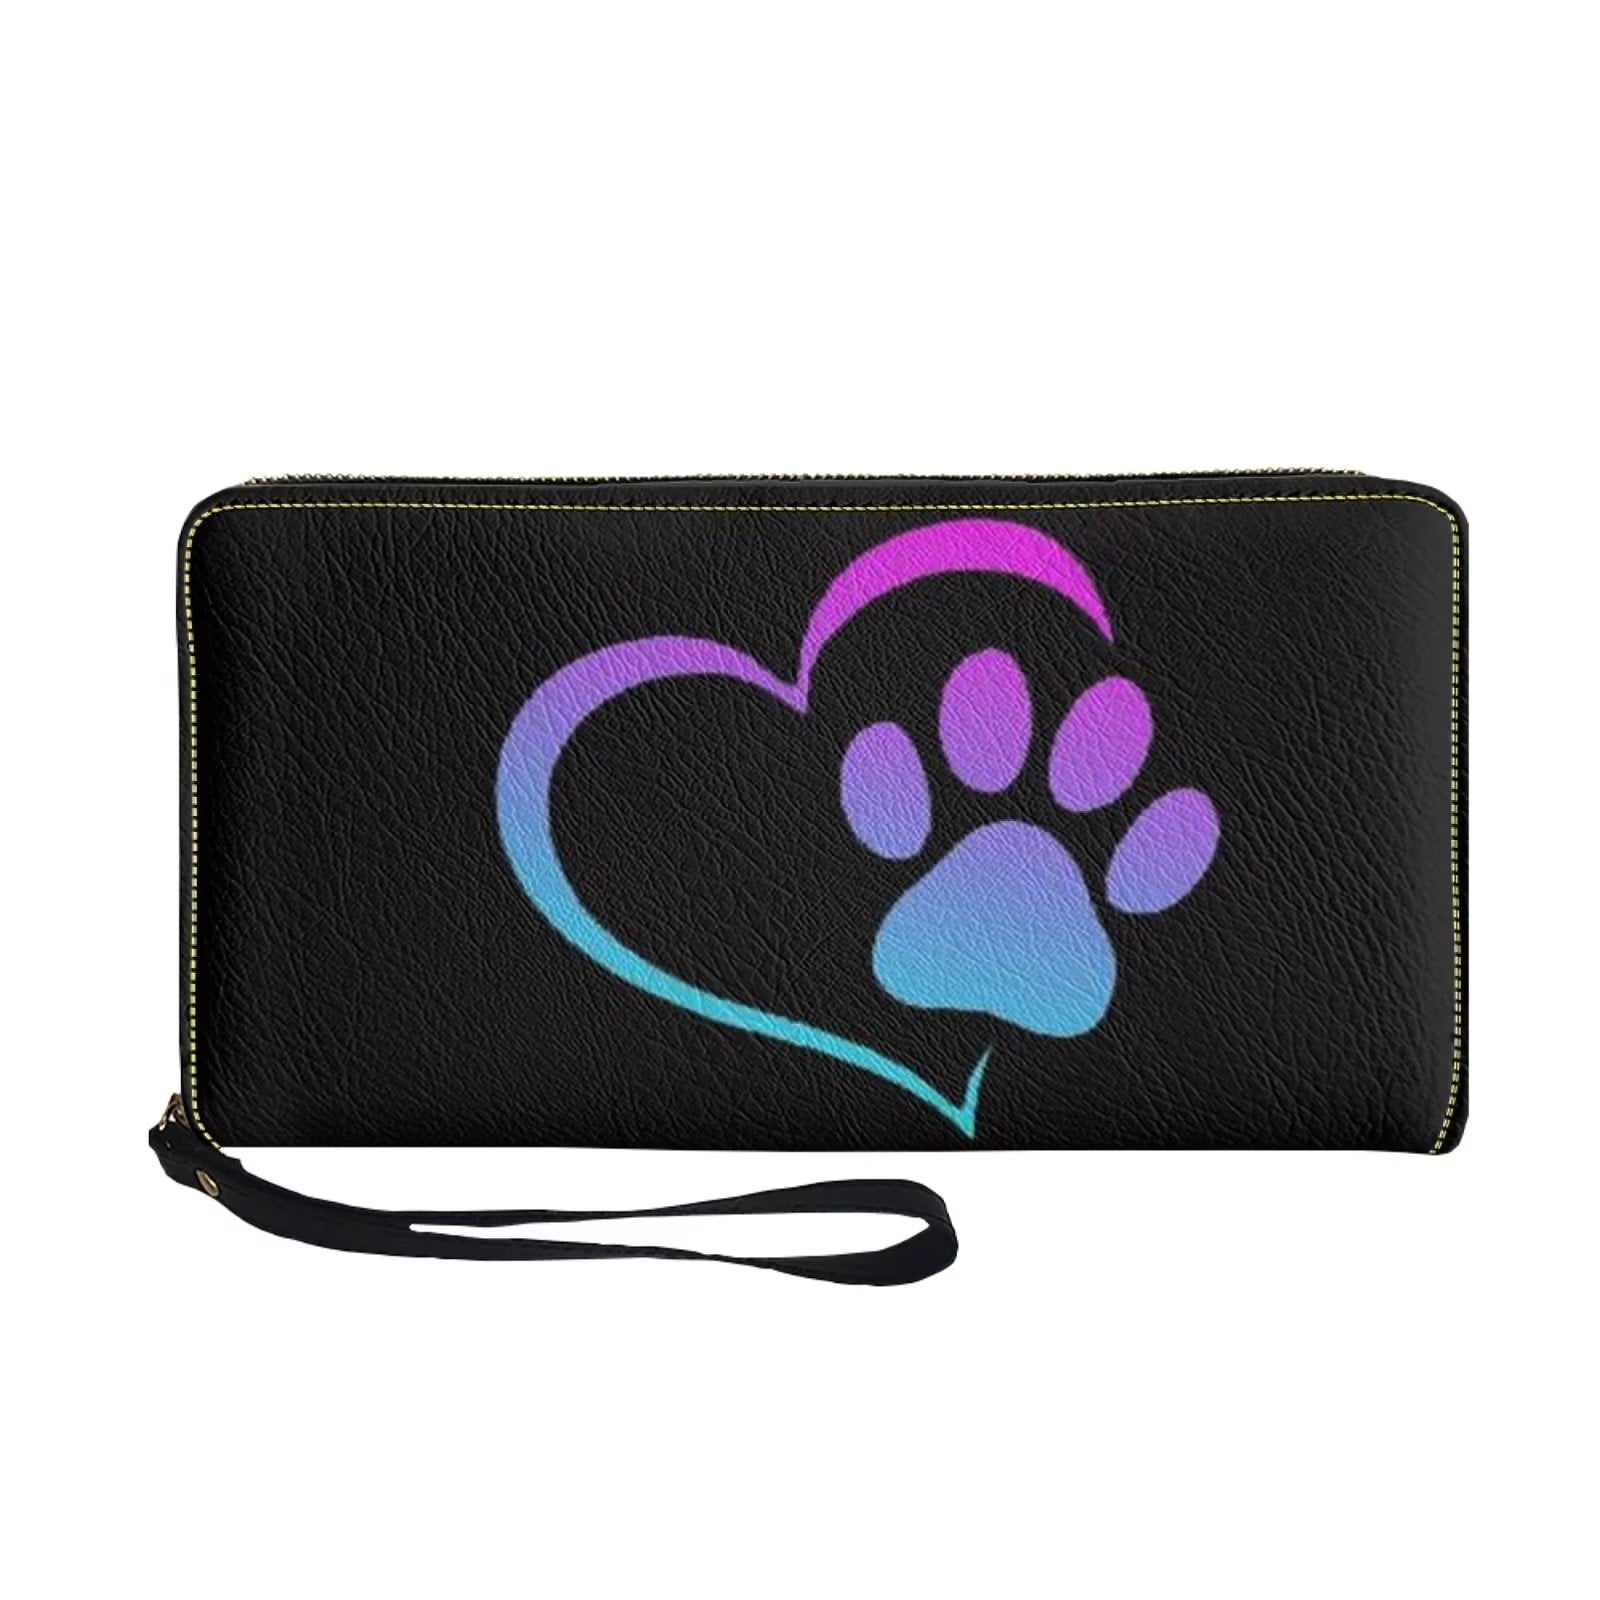 Colorful Pawprint Beaded Coin Purse LAC-CP-1075